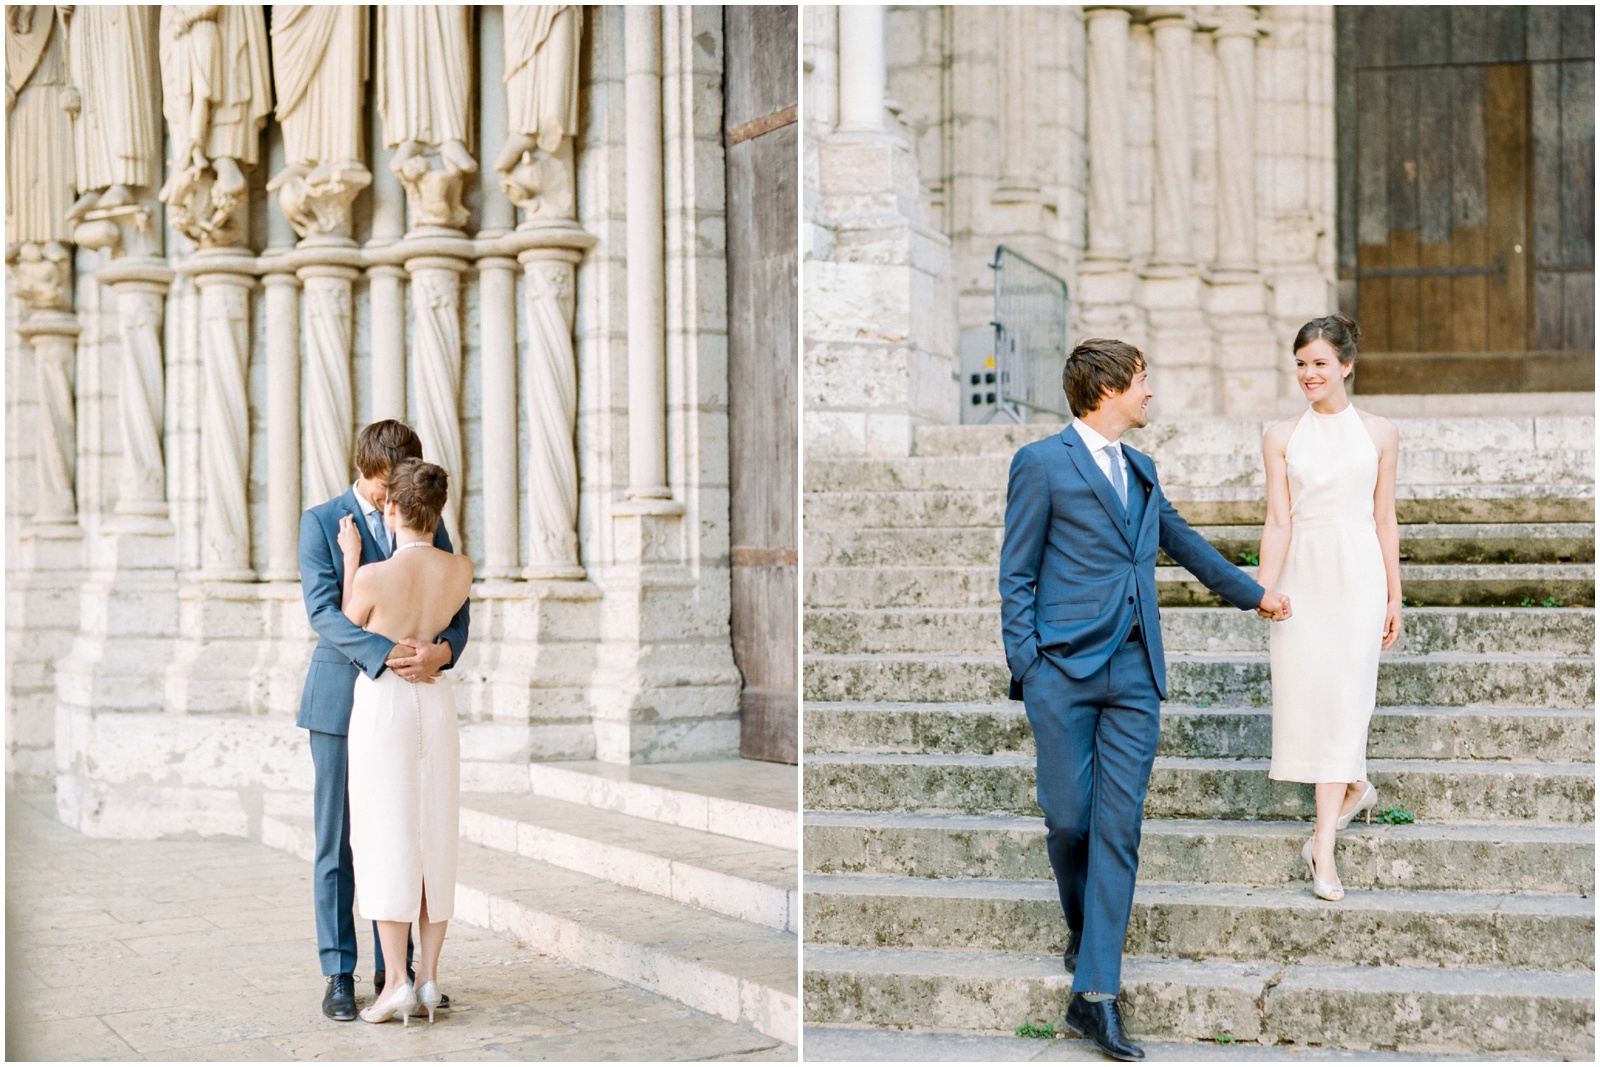 Charming French anniversary photo session